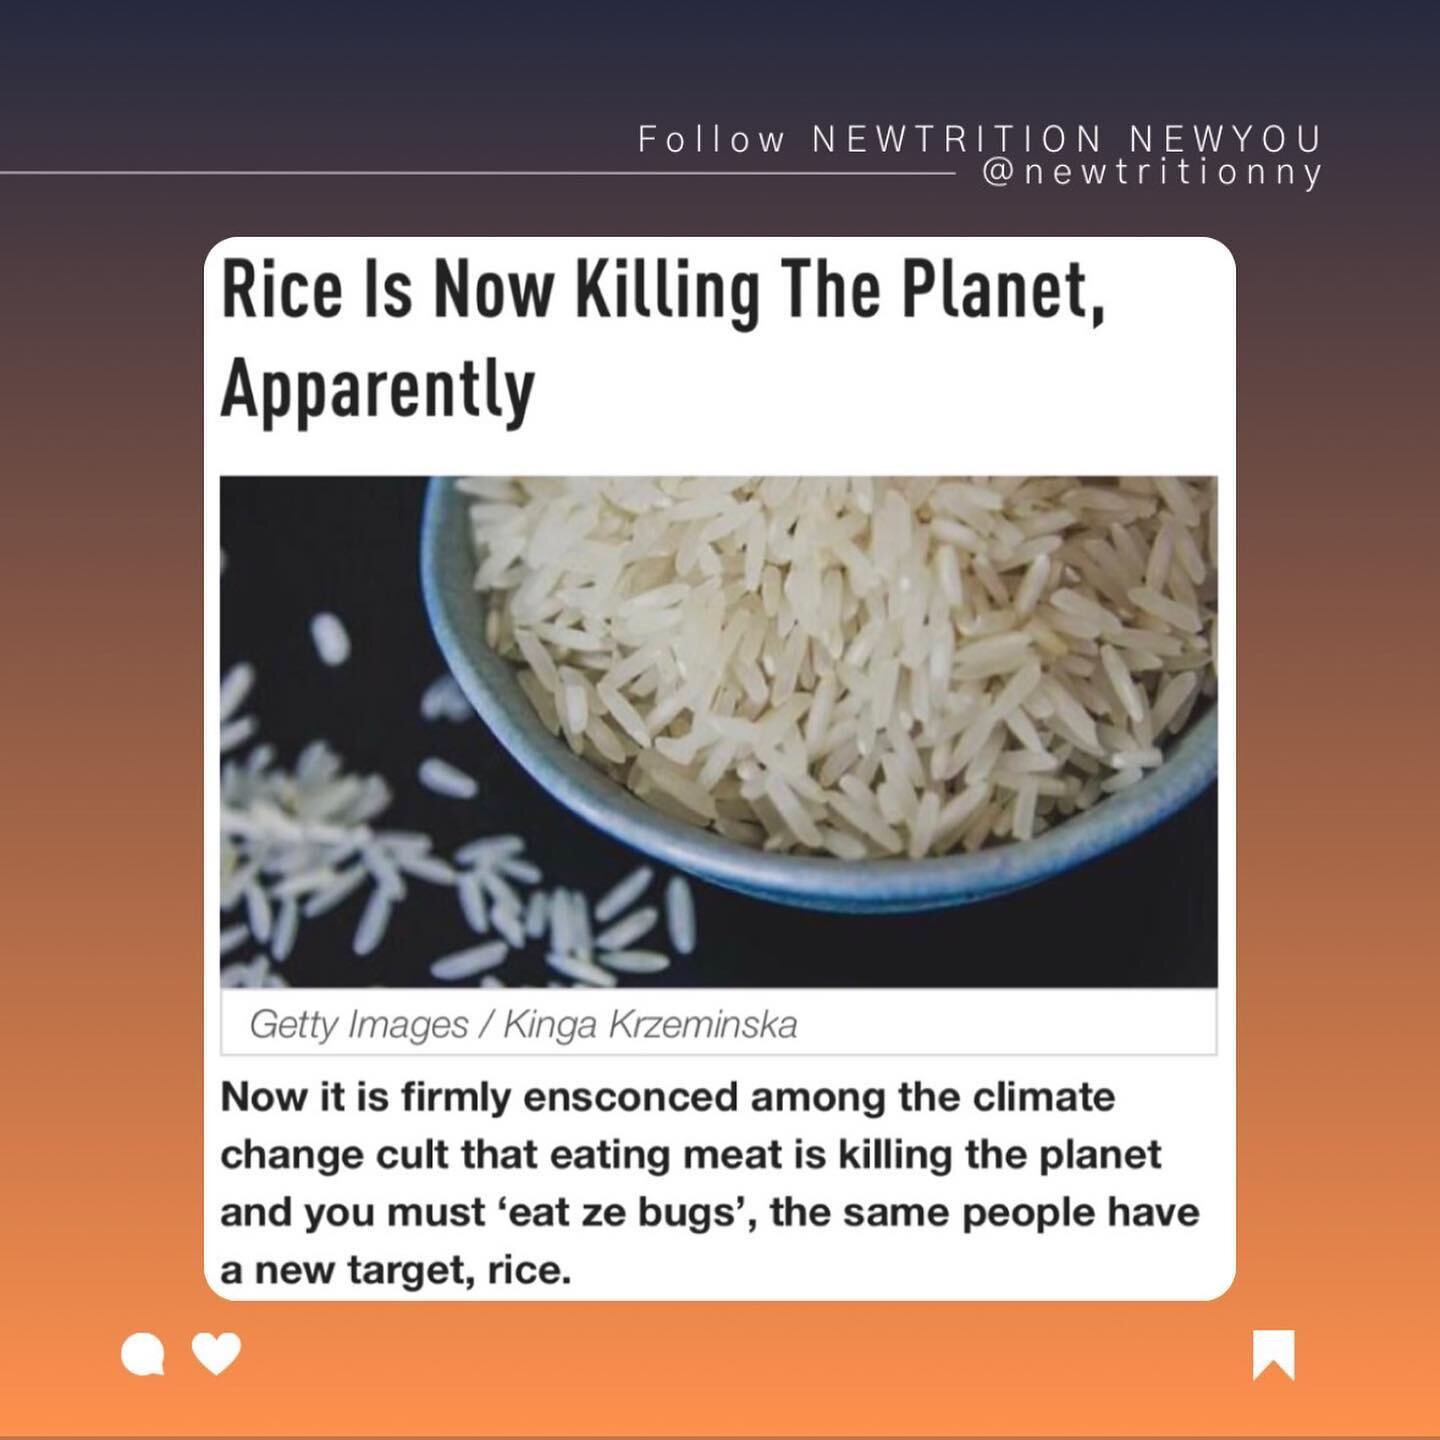 In today&rsquo;s &ldquo;Save-the-Earth; Kill-the-People&rdquo; News, looks like the
environazis have set their sights on a new target&mdash;rice!
.
To preface, I&rsquo;m not a big fan of rice in terms of health, but I&rsquo;m also well aware that mor